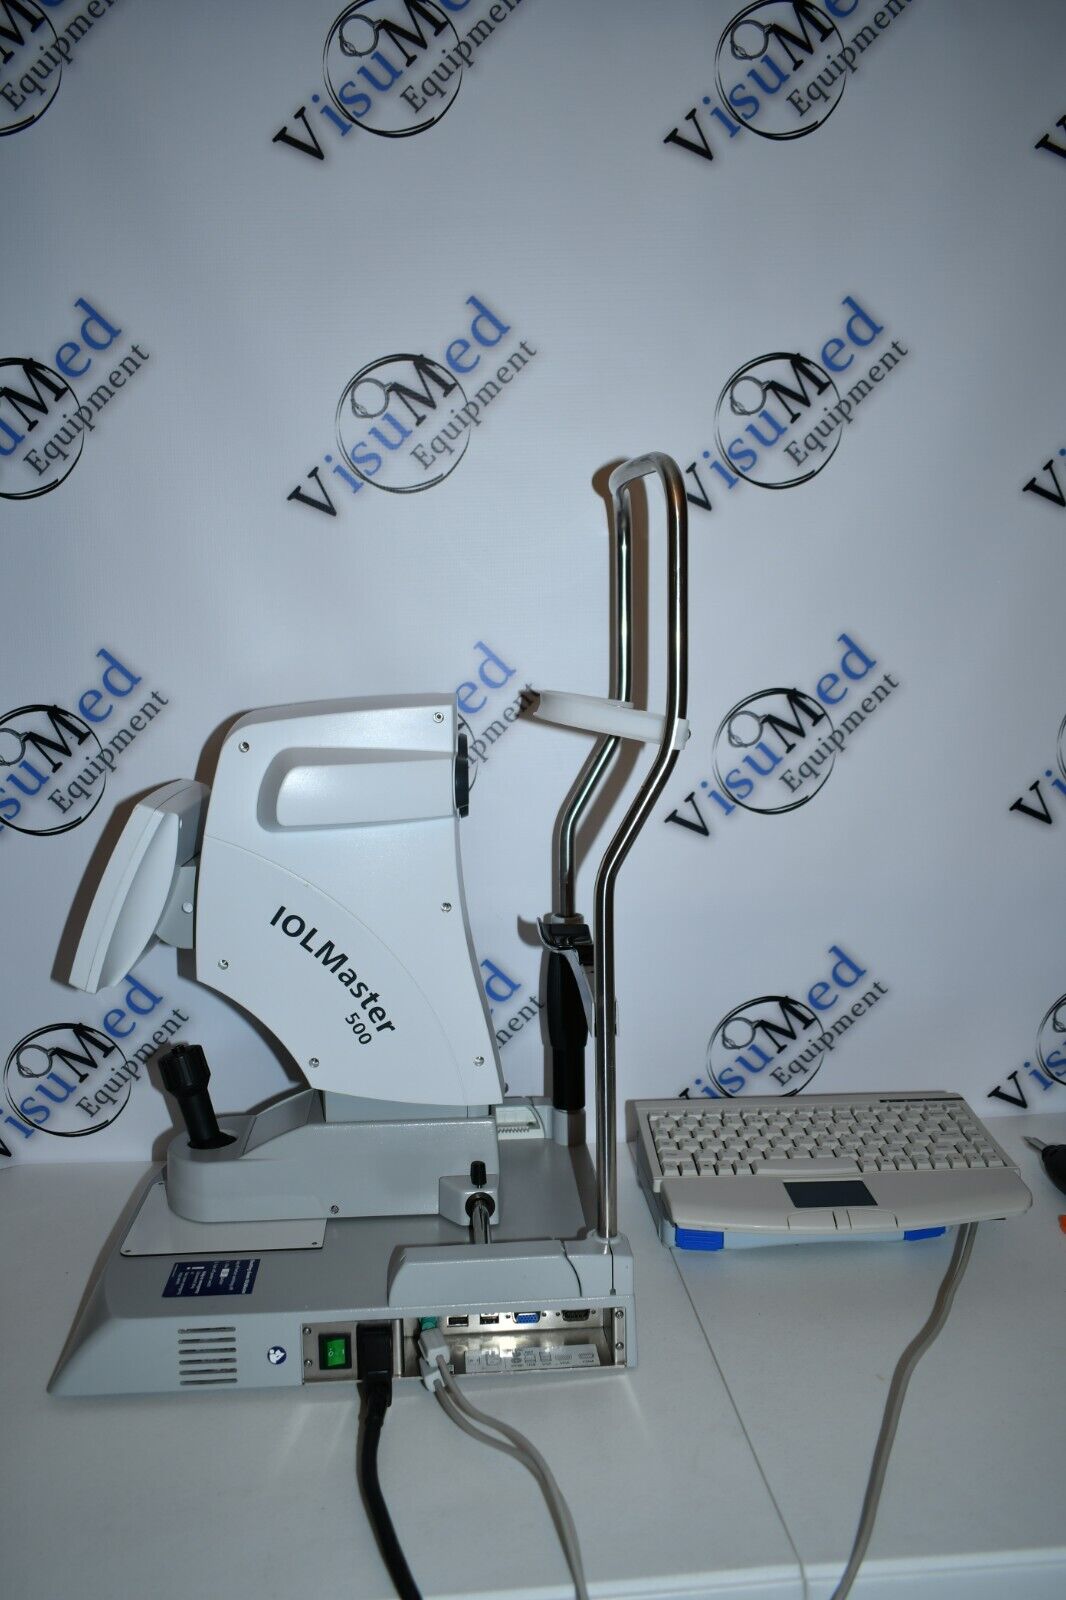 Zeiss IOL Master 500 Optical Biometer with accessories